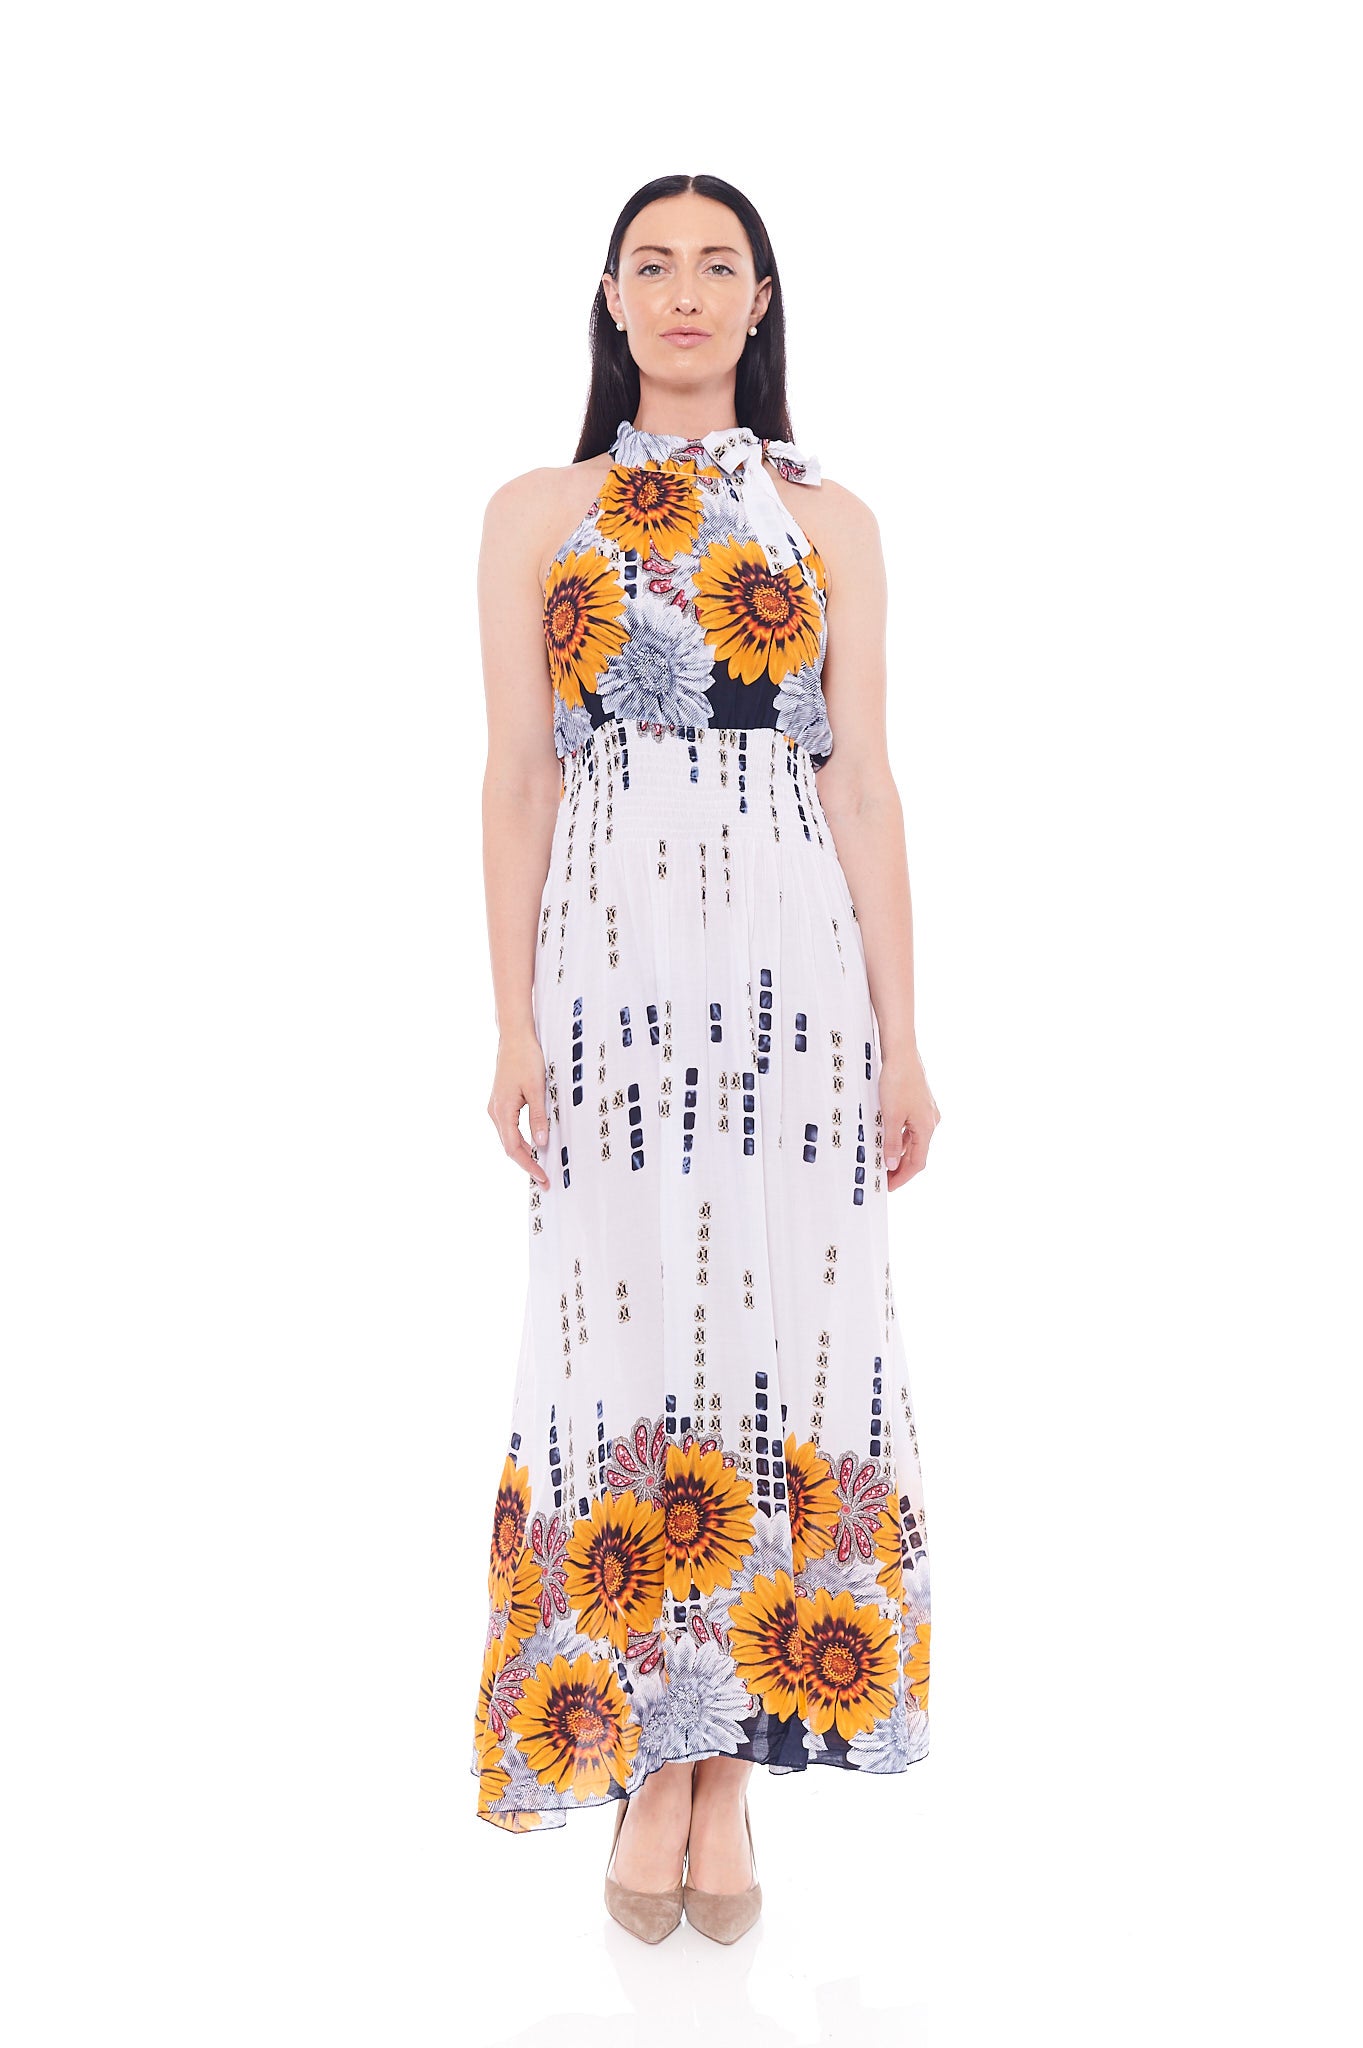 THE ALL YOU NEED SUNFLOWER DRESS IN WHITE